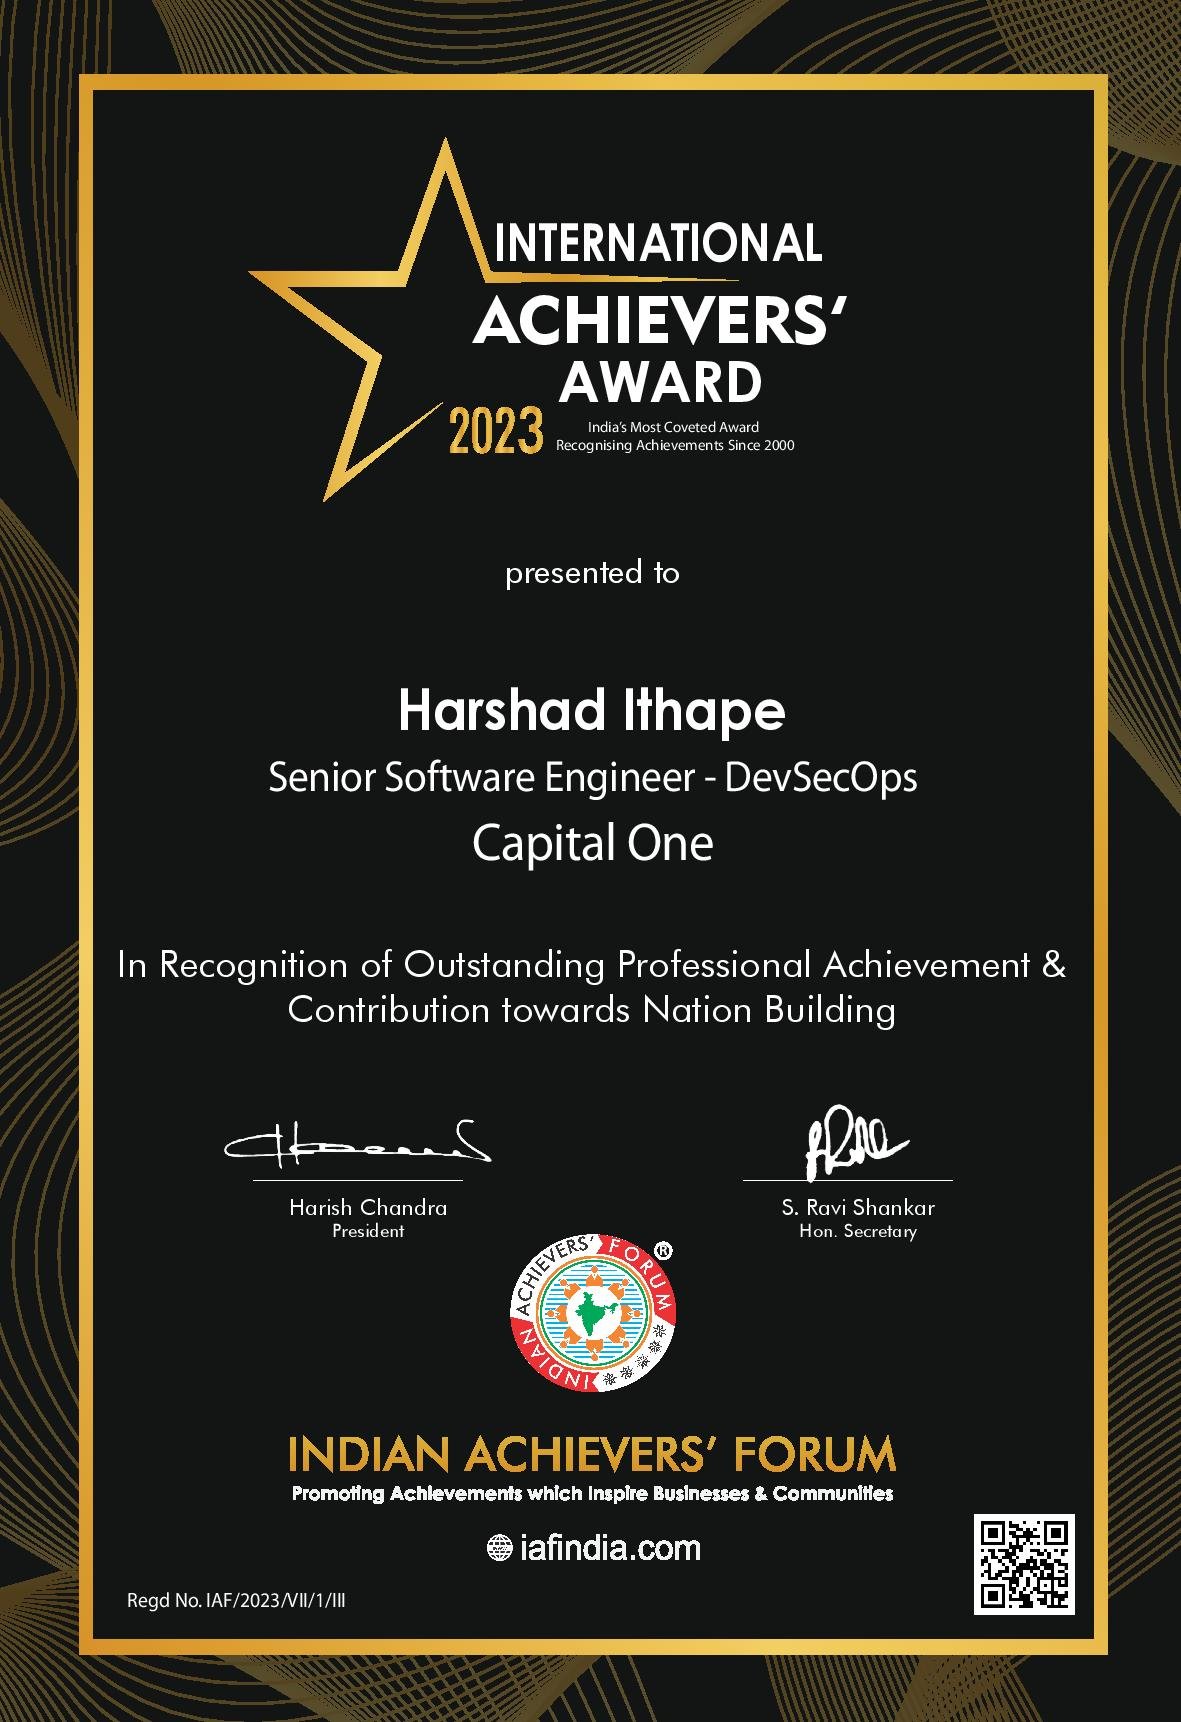 Mr. Harshad Ithape - Winner of Indian Achievers' Award 2022-23